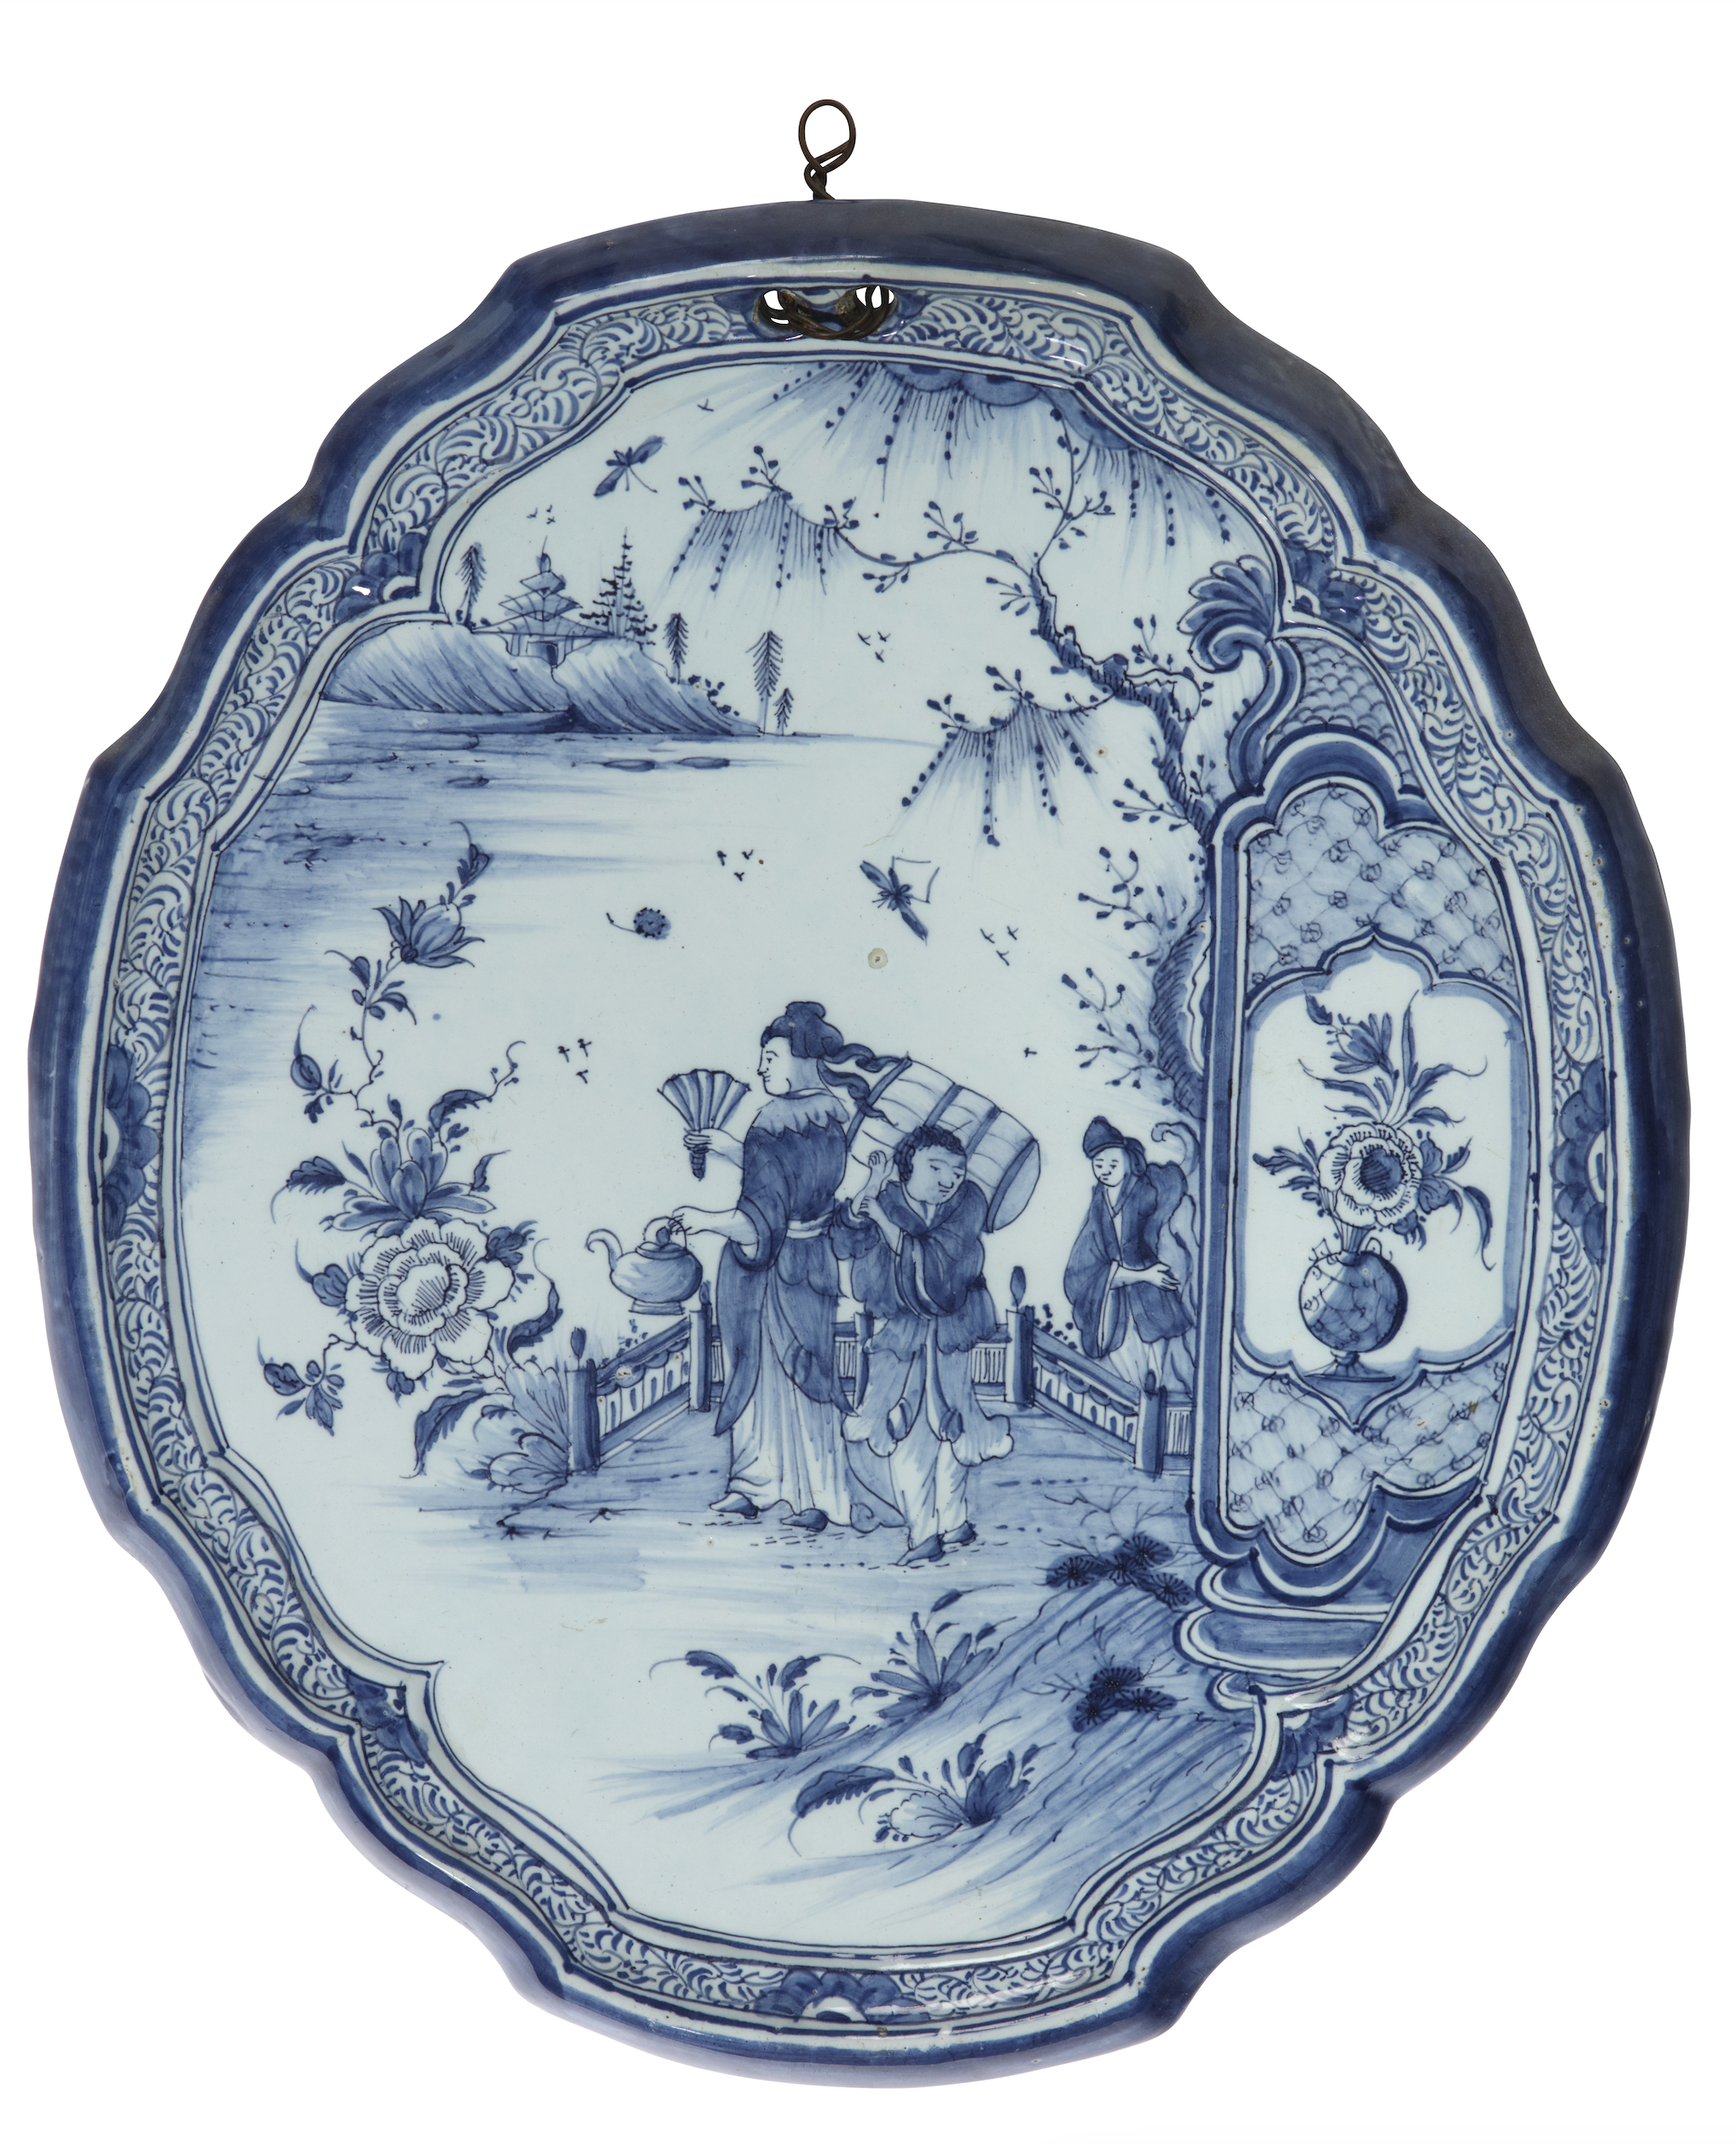 Oval-Shaped Blue and White Plaque  Delft, circa 1765